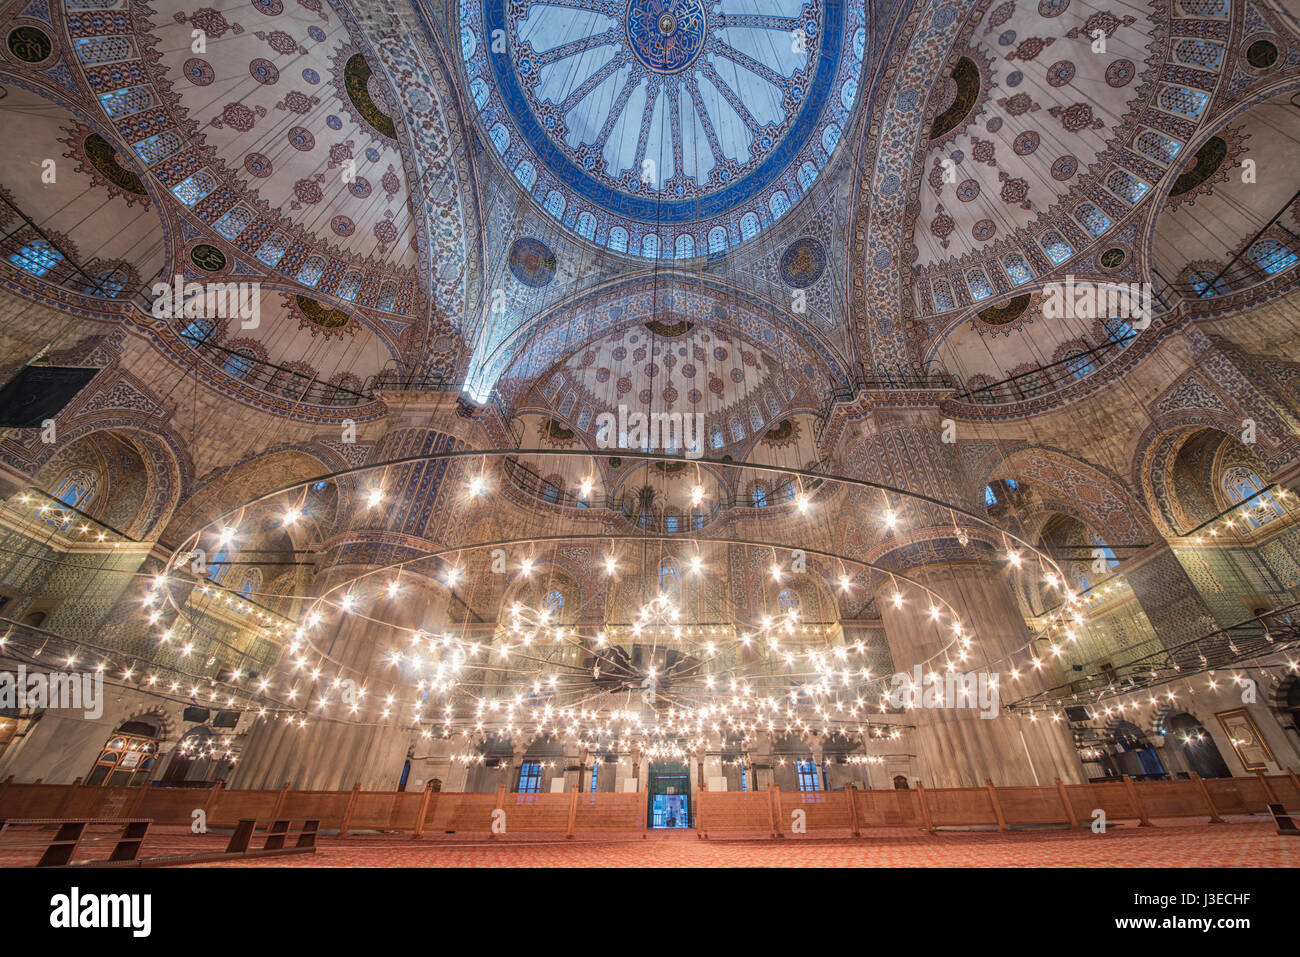 Interior of the Sultanahmet -Blue Mosque in Istanbul, Turkey Stock Photo